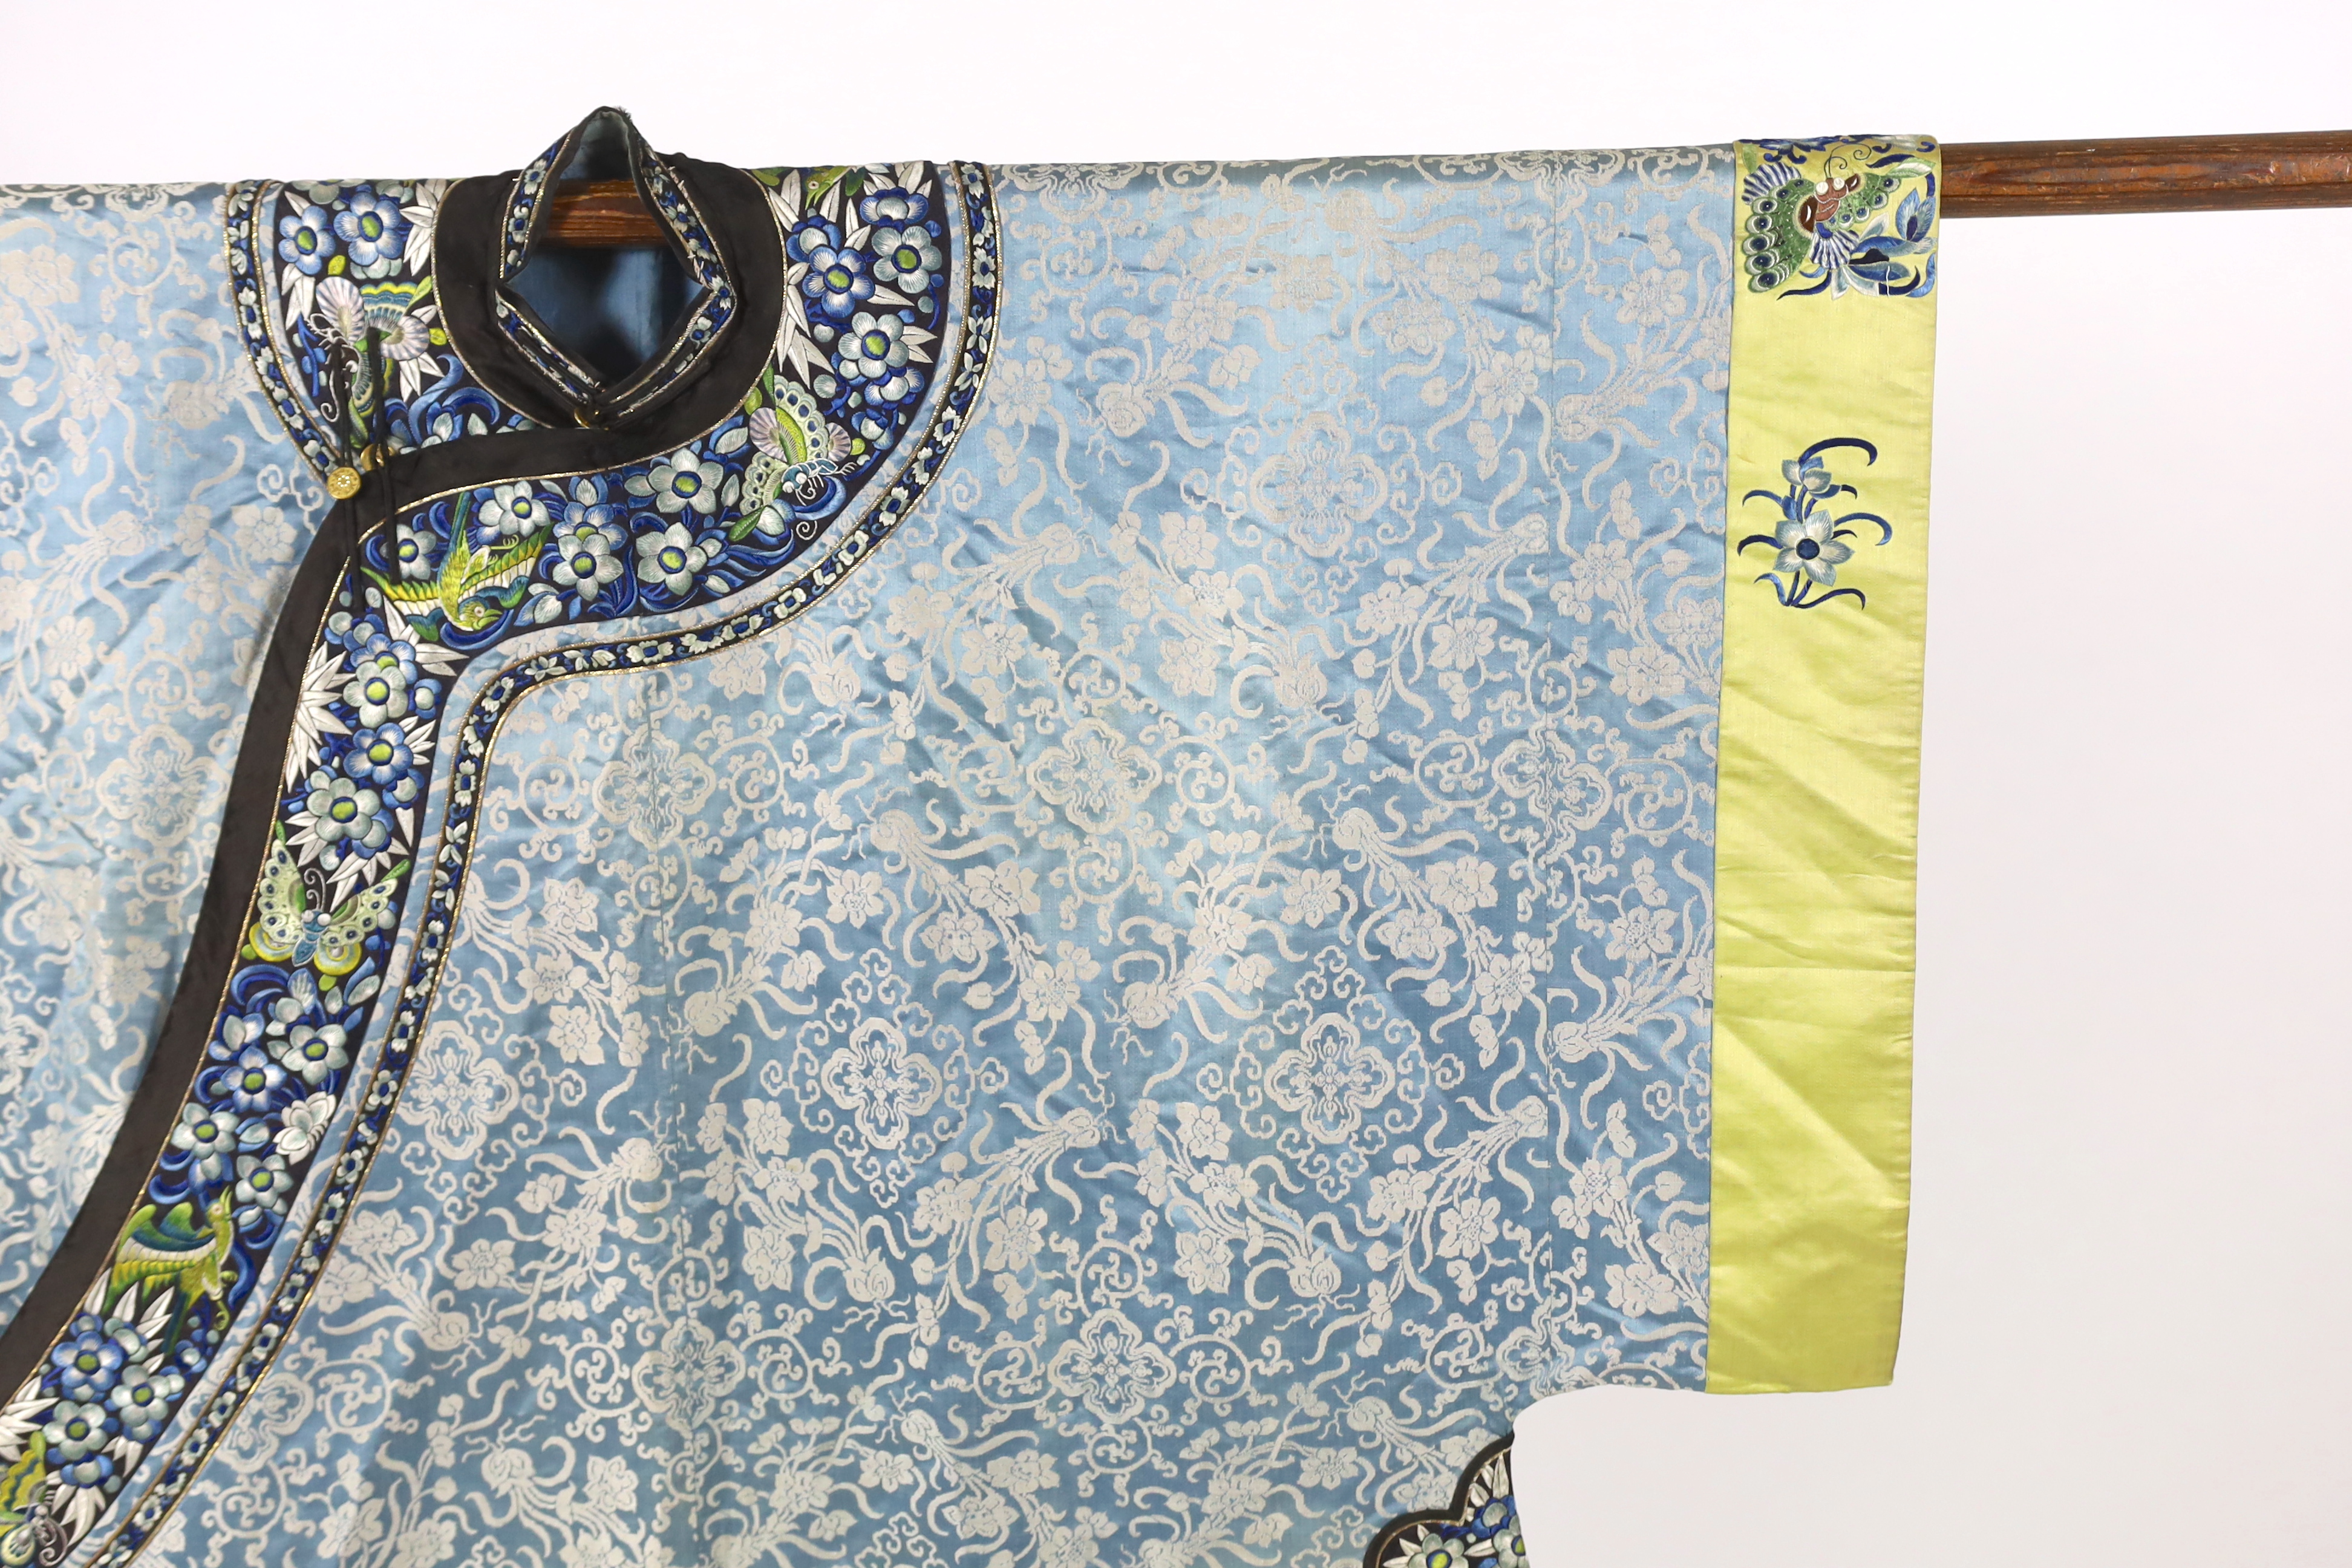 A late 19th / early 20th century silk damask robe, edged with highly ornate embroidered silk braiding, edged with fine gold and black borders, with yellow silk embroidered sleeve bands, the blue silk lining is faded in p